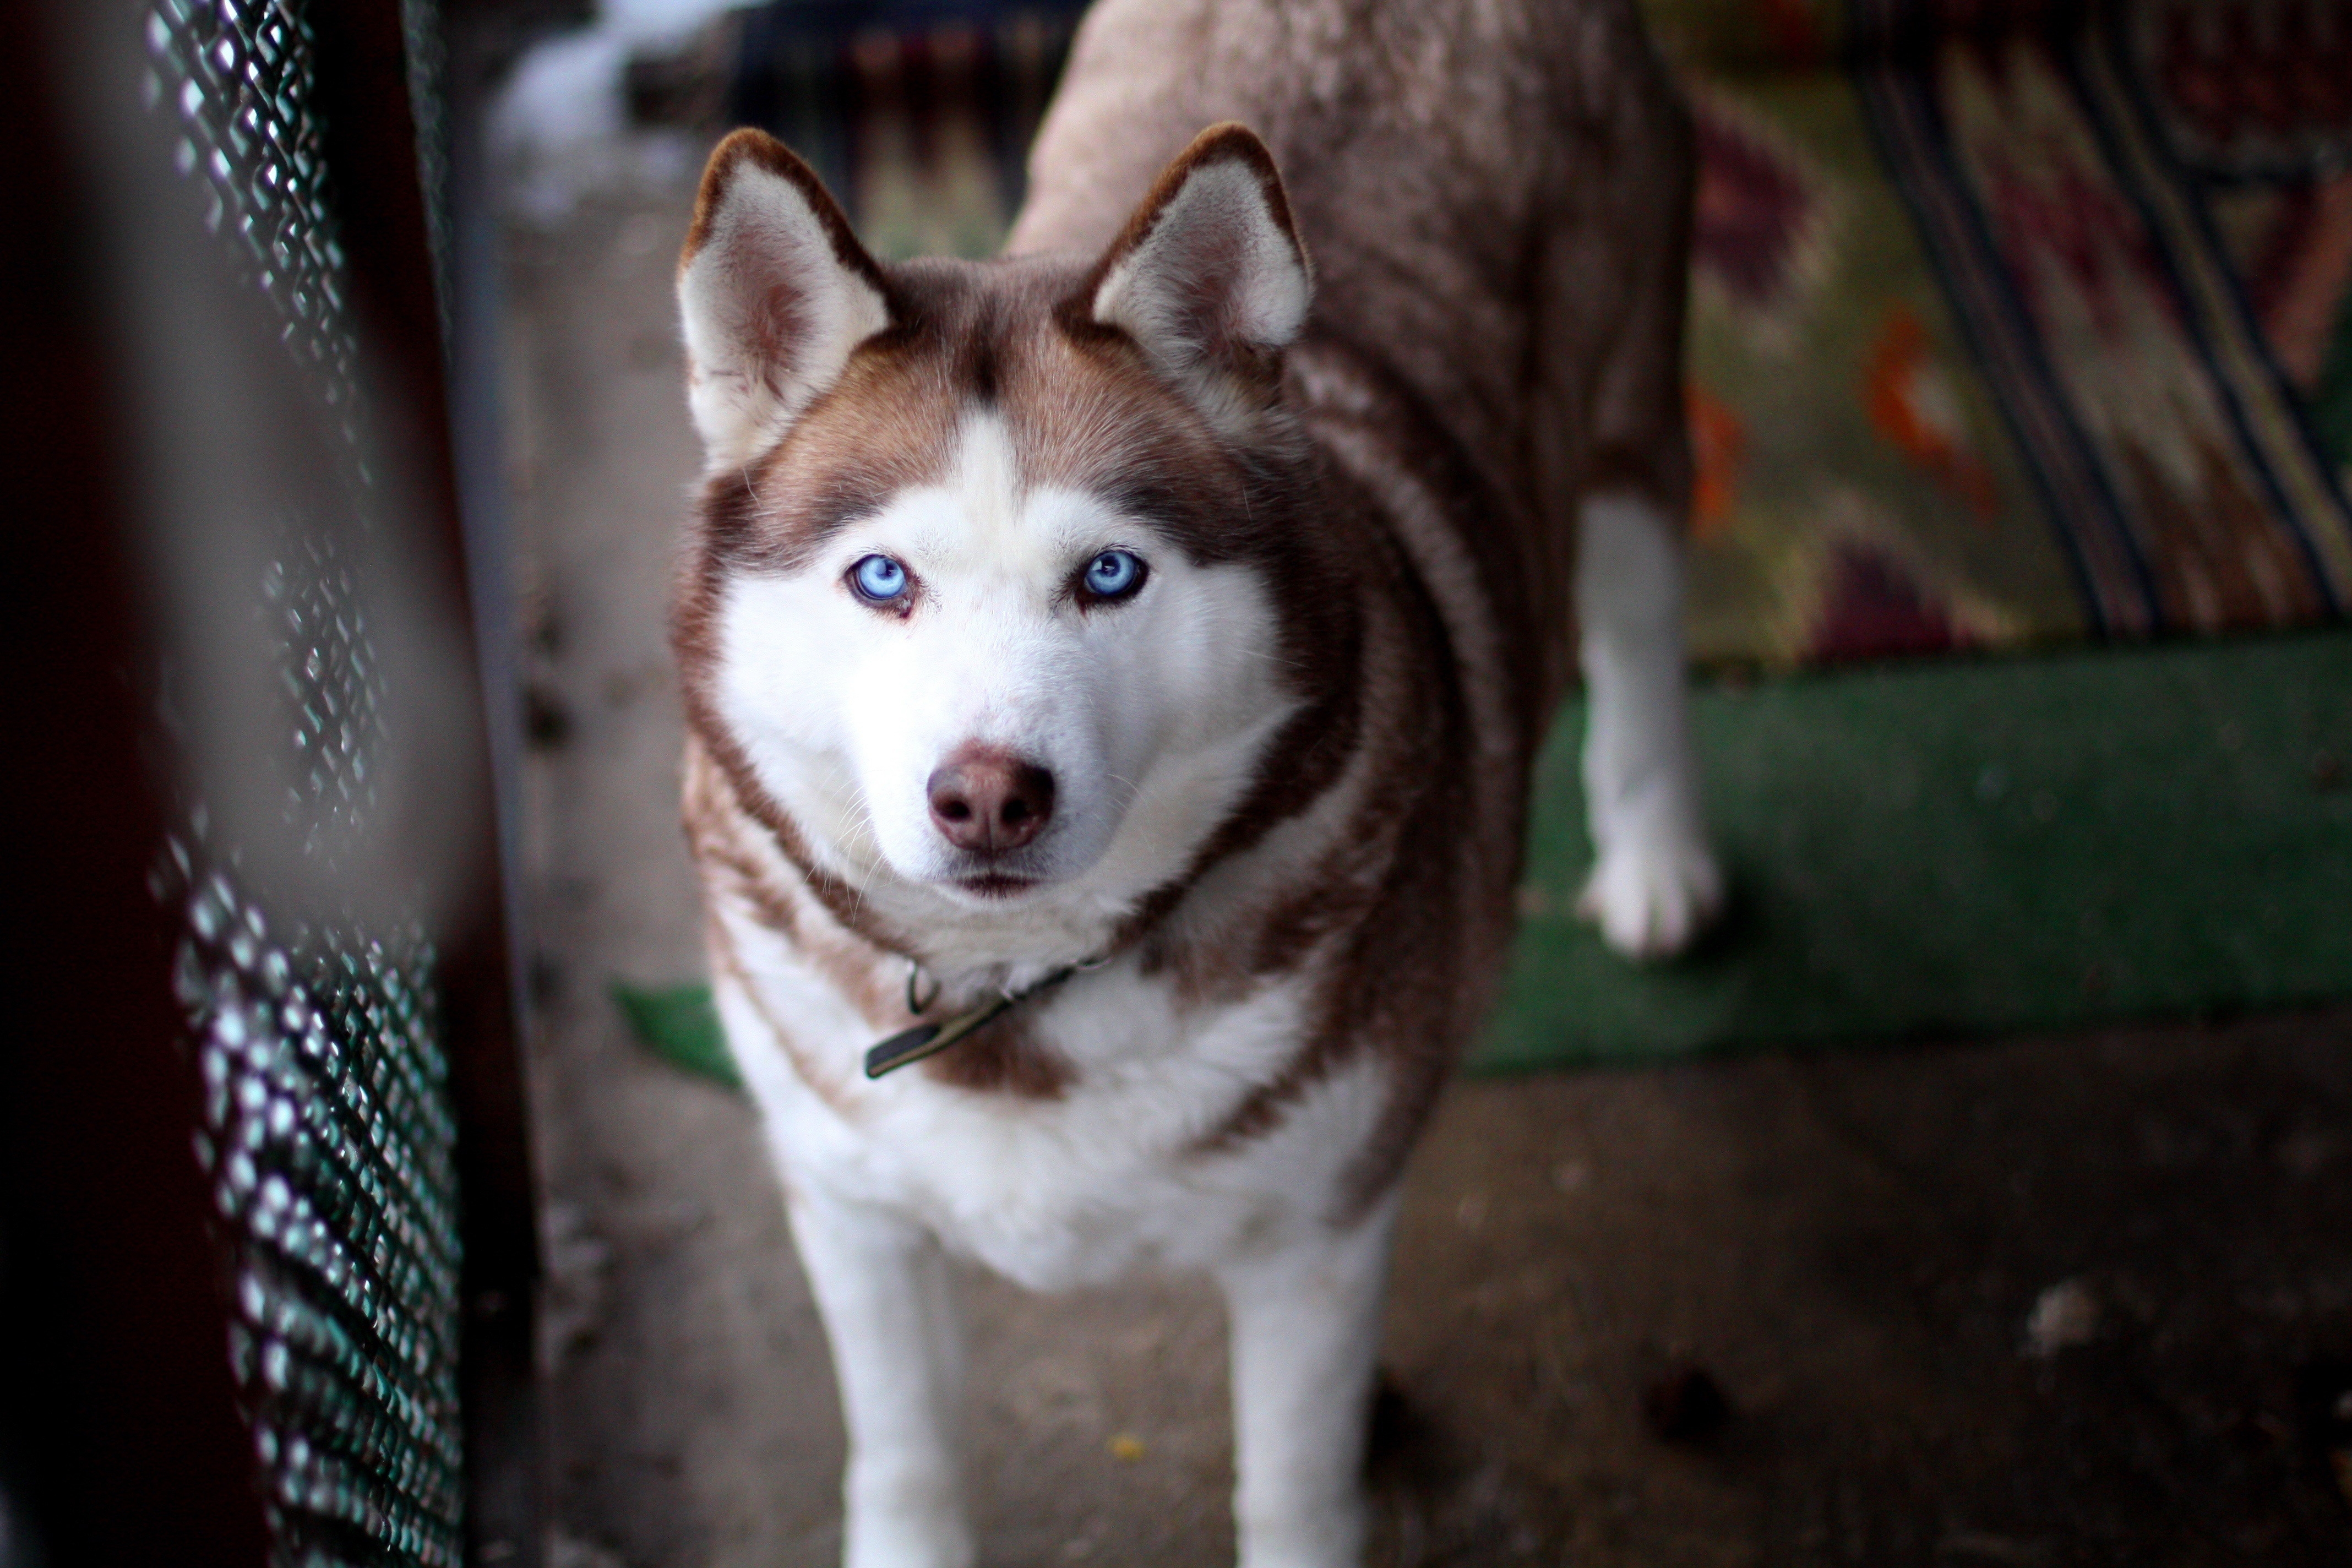 80810 download wallpaper animals, muzzle, dog, sight, opinion, husky, haska, collar screensavers and pictures for free